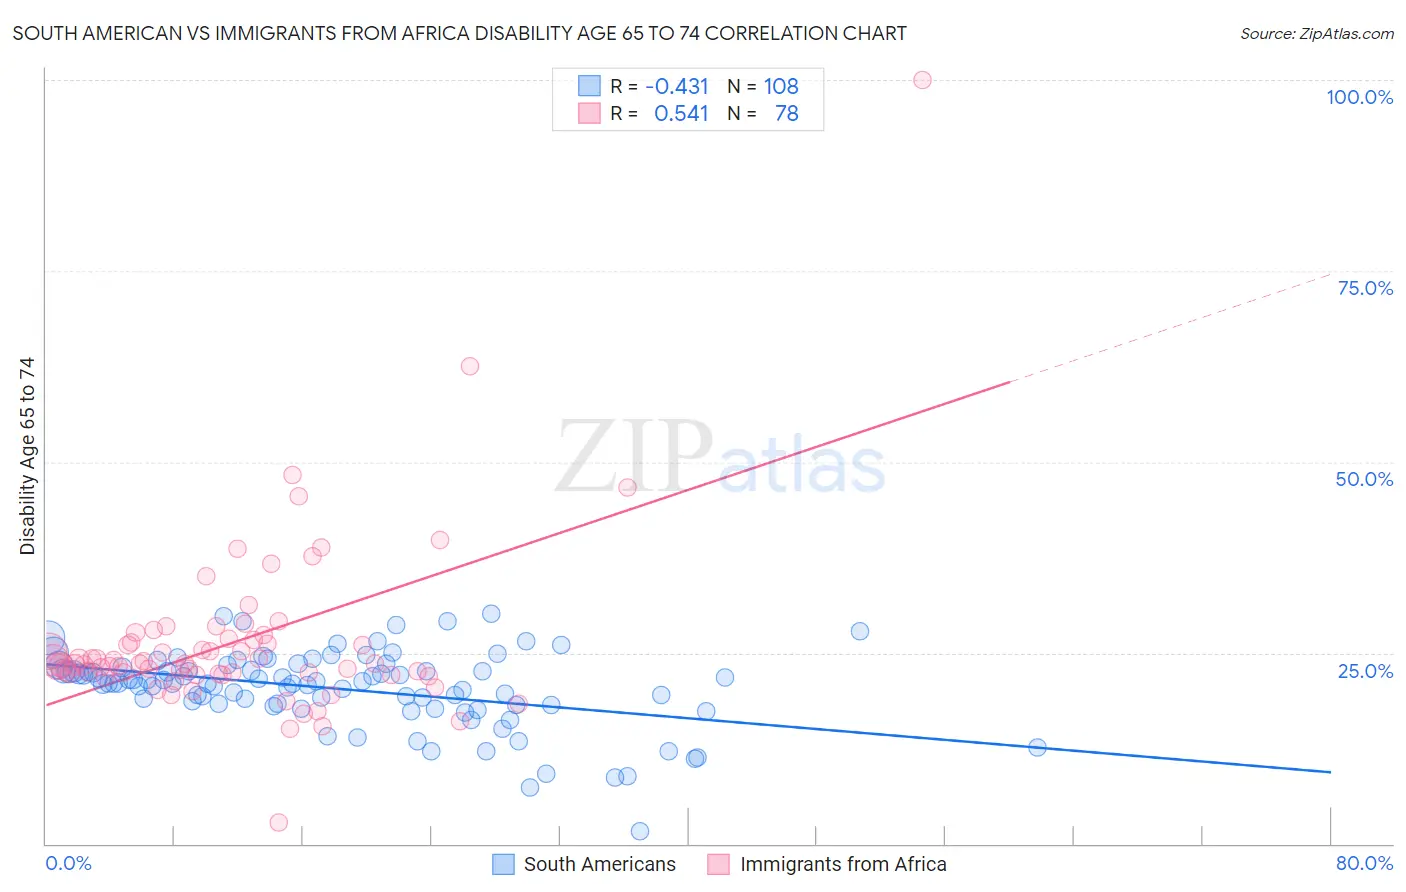 South American vs Immigrants from Africa Disability Age 65 to 74